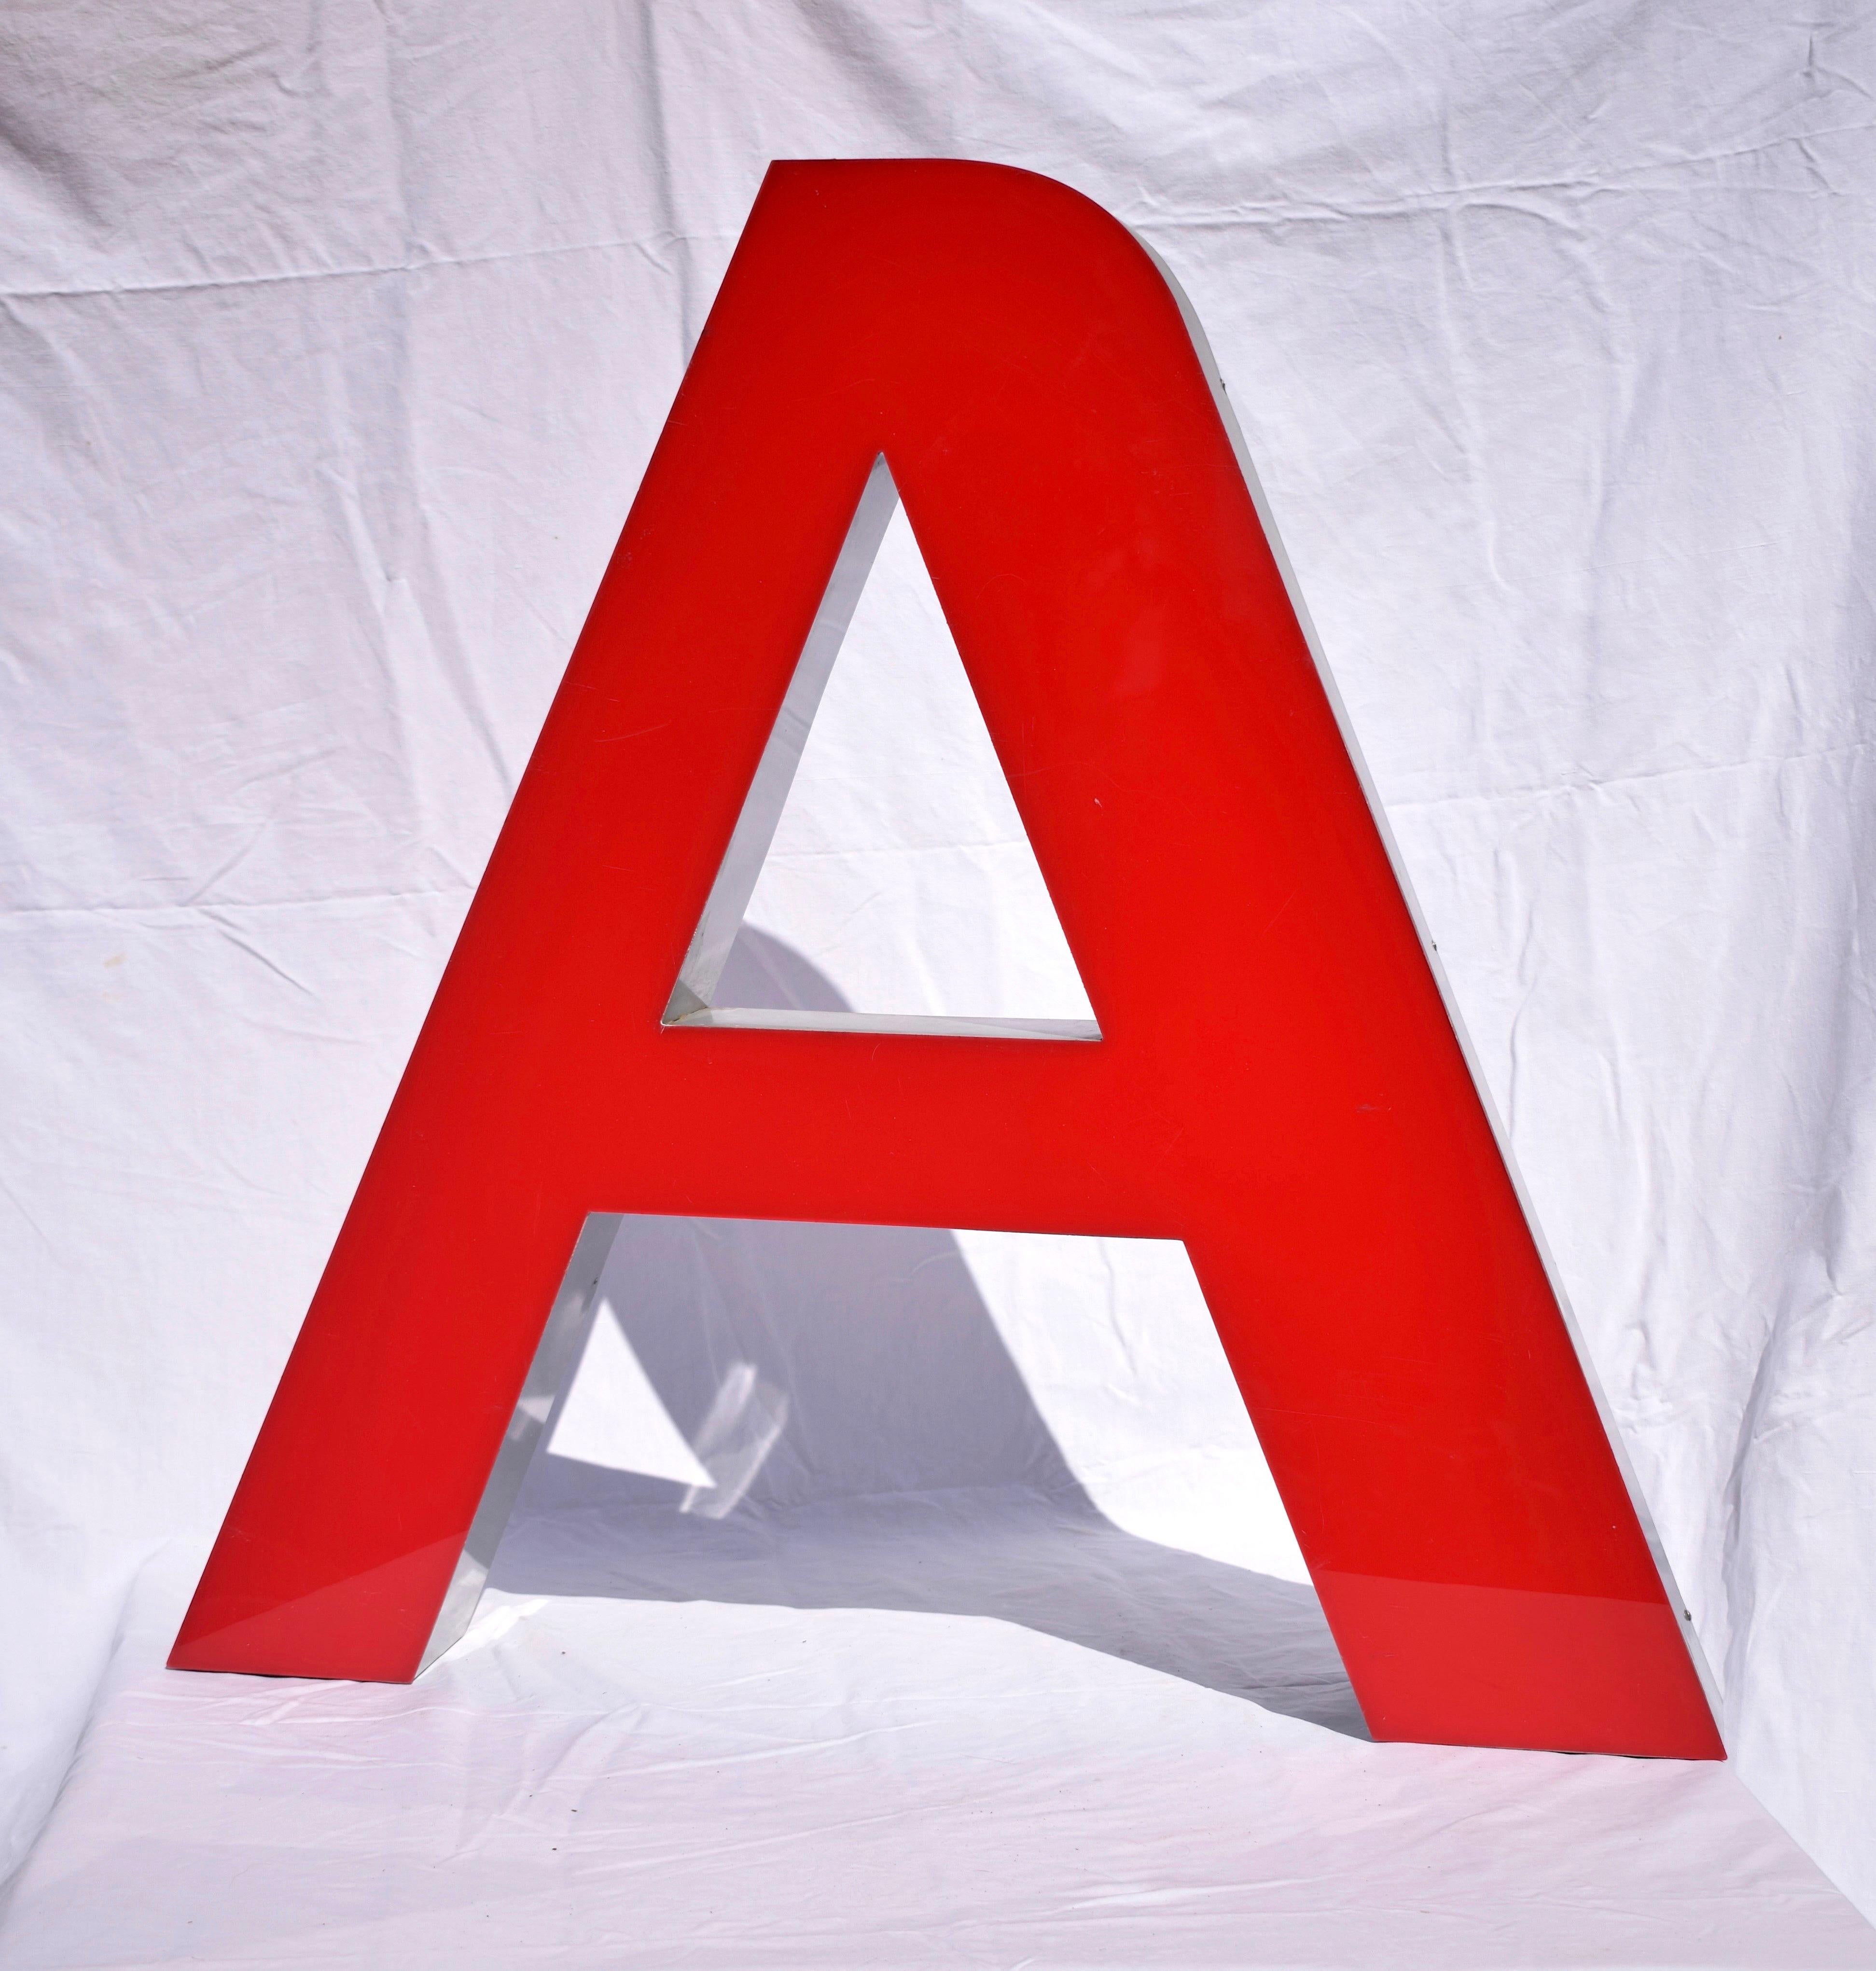 This acrylic LED letter is an electric light sign used for advertisement during the 1960s. It is a classic example of a when advertisement became a fashionable tool to promote not just products but lifestyle, clearly seen through the Pop Art